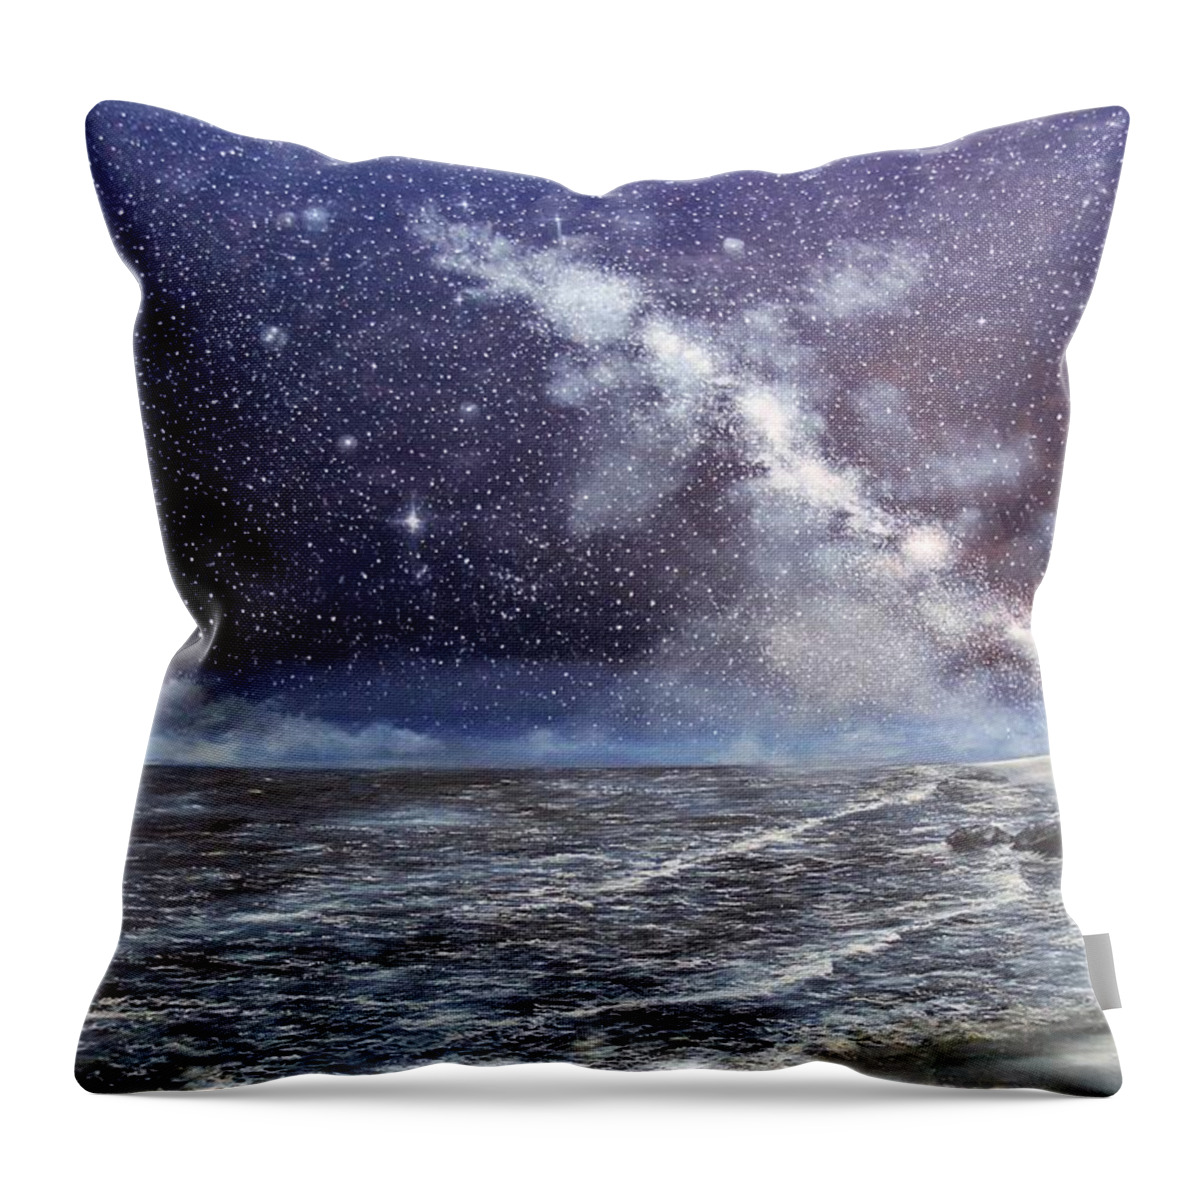 New Jersey Throw Pillow featuring the painting Milky Way Over The Jersey Shore by Ken Ahlering